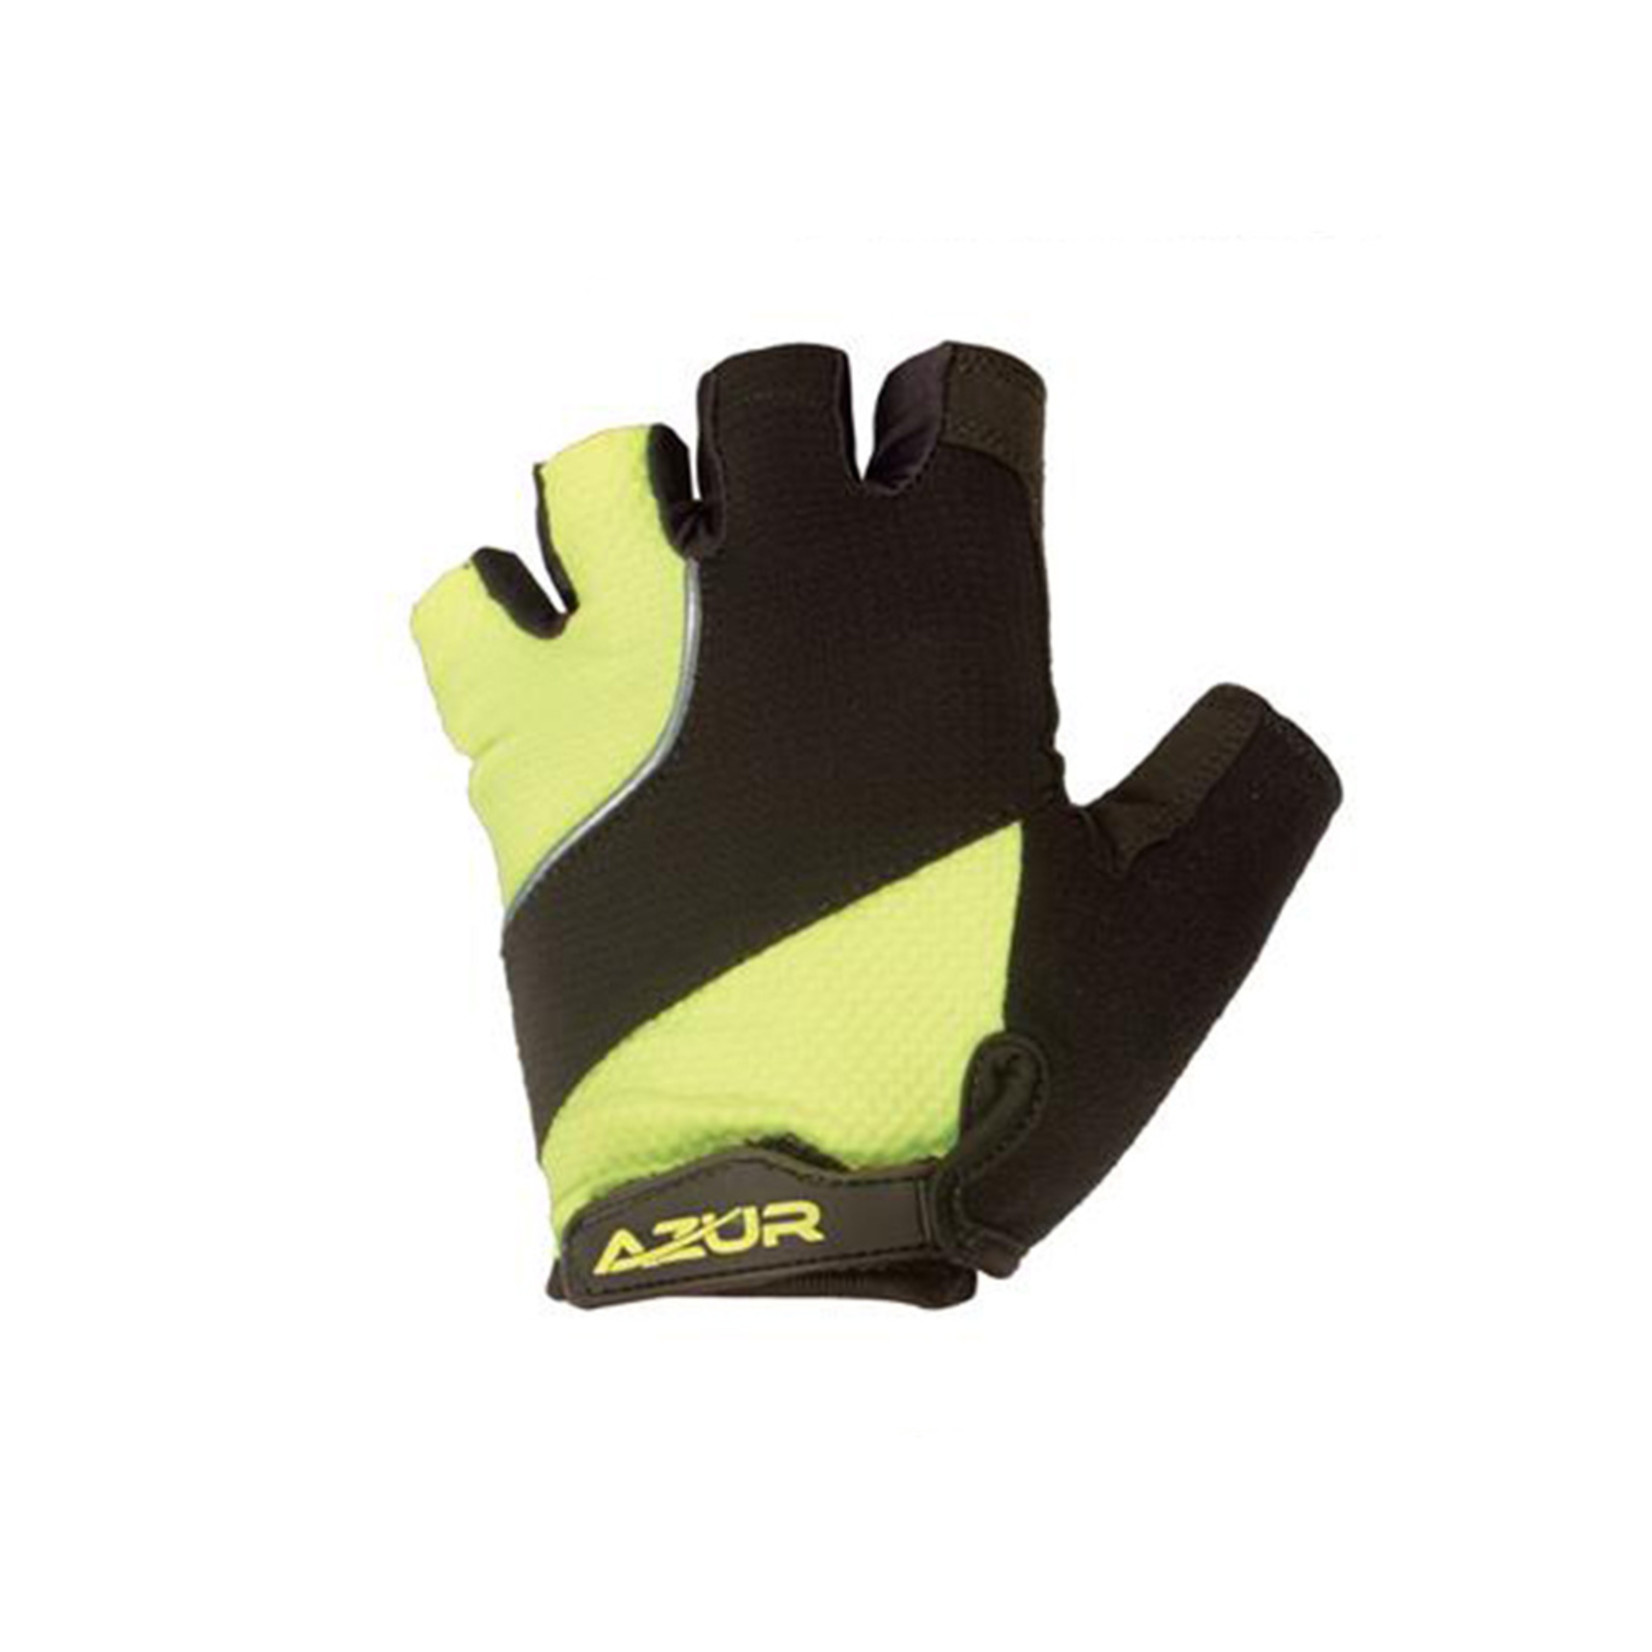 Azur Azur Bike/Cycling Glove - S6 Series - Synthetic Palm - Yellow - X-Small